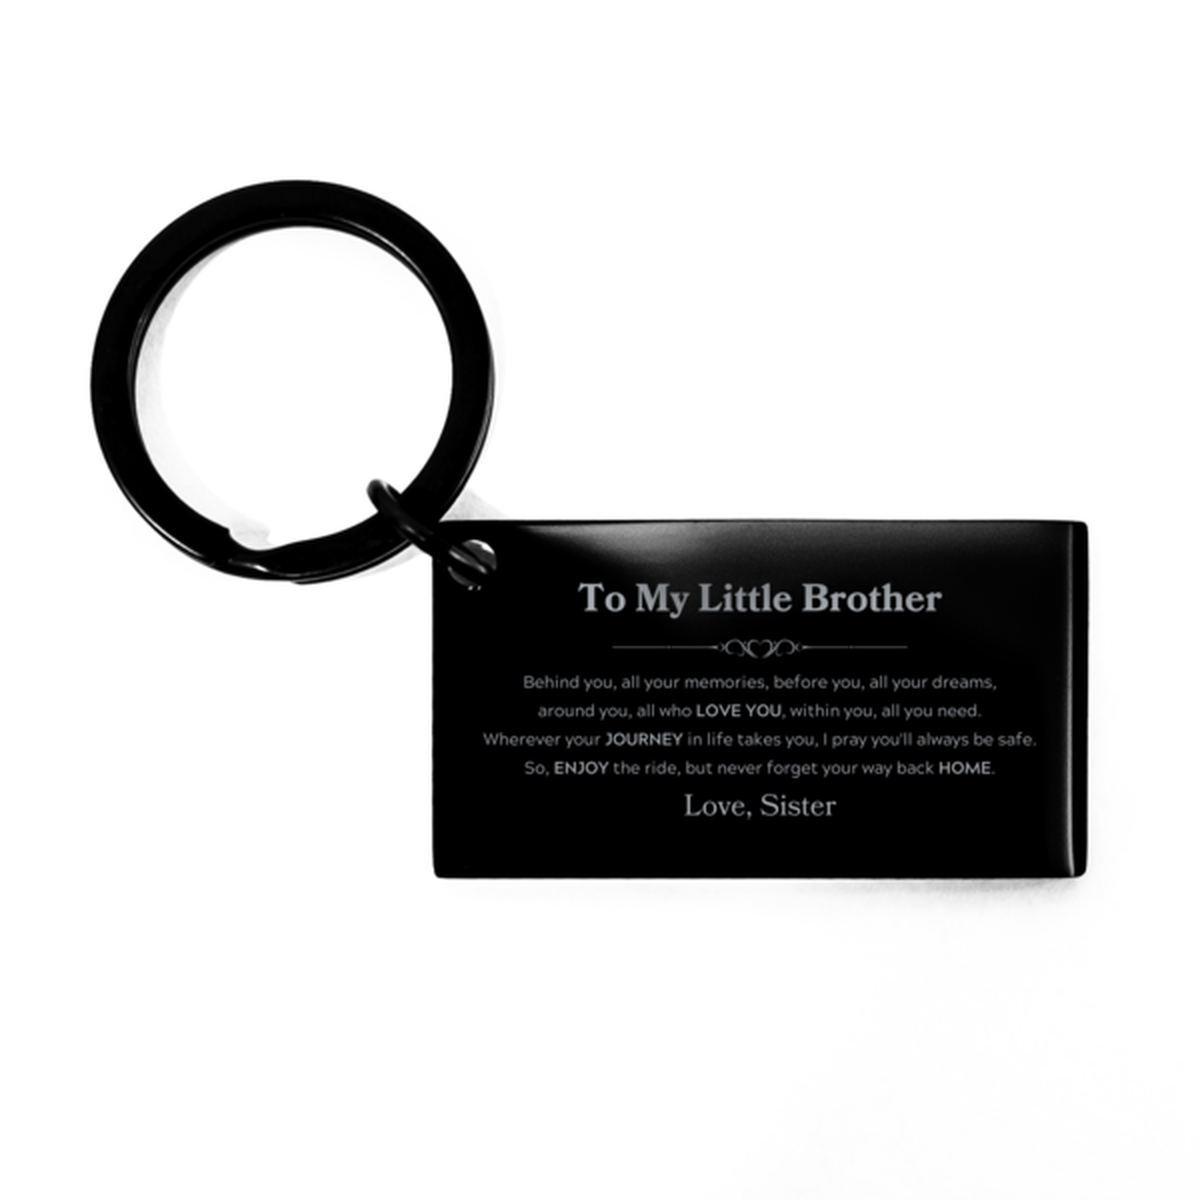 To My Little Brother Graduation Gifts from Sister, Little Brother Keychain Christmas Birthday Gifts for Little Brother Behind you, all your memories, before you, all your dreams. Love, Sister